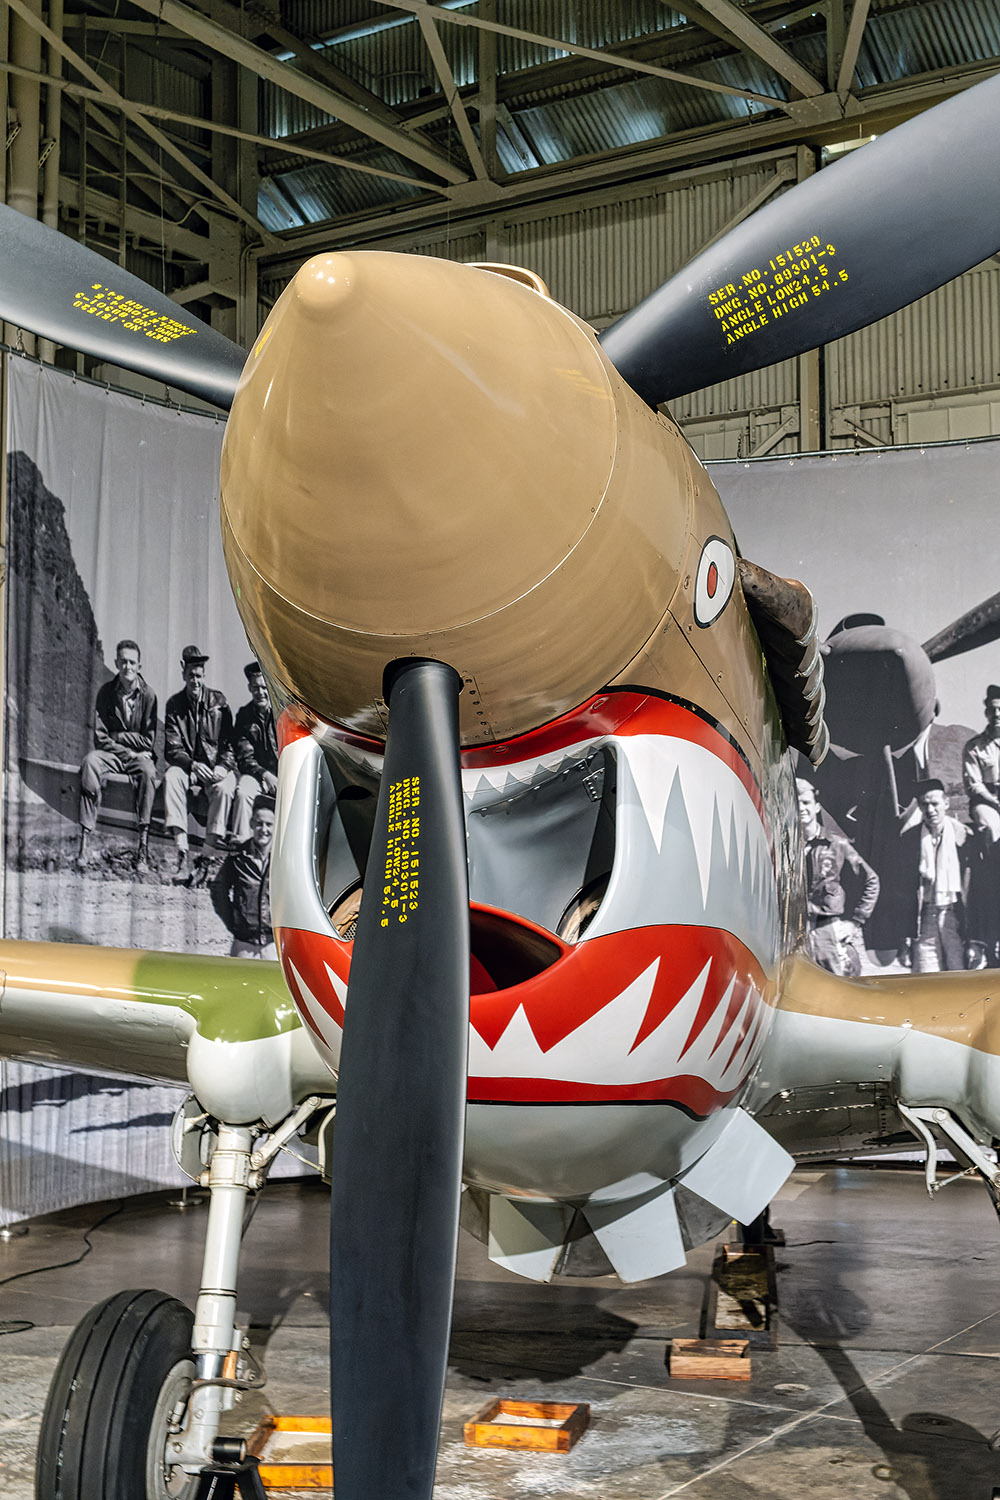 A look at the front of the Curtiss P-40 Warhawk